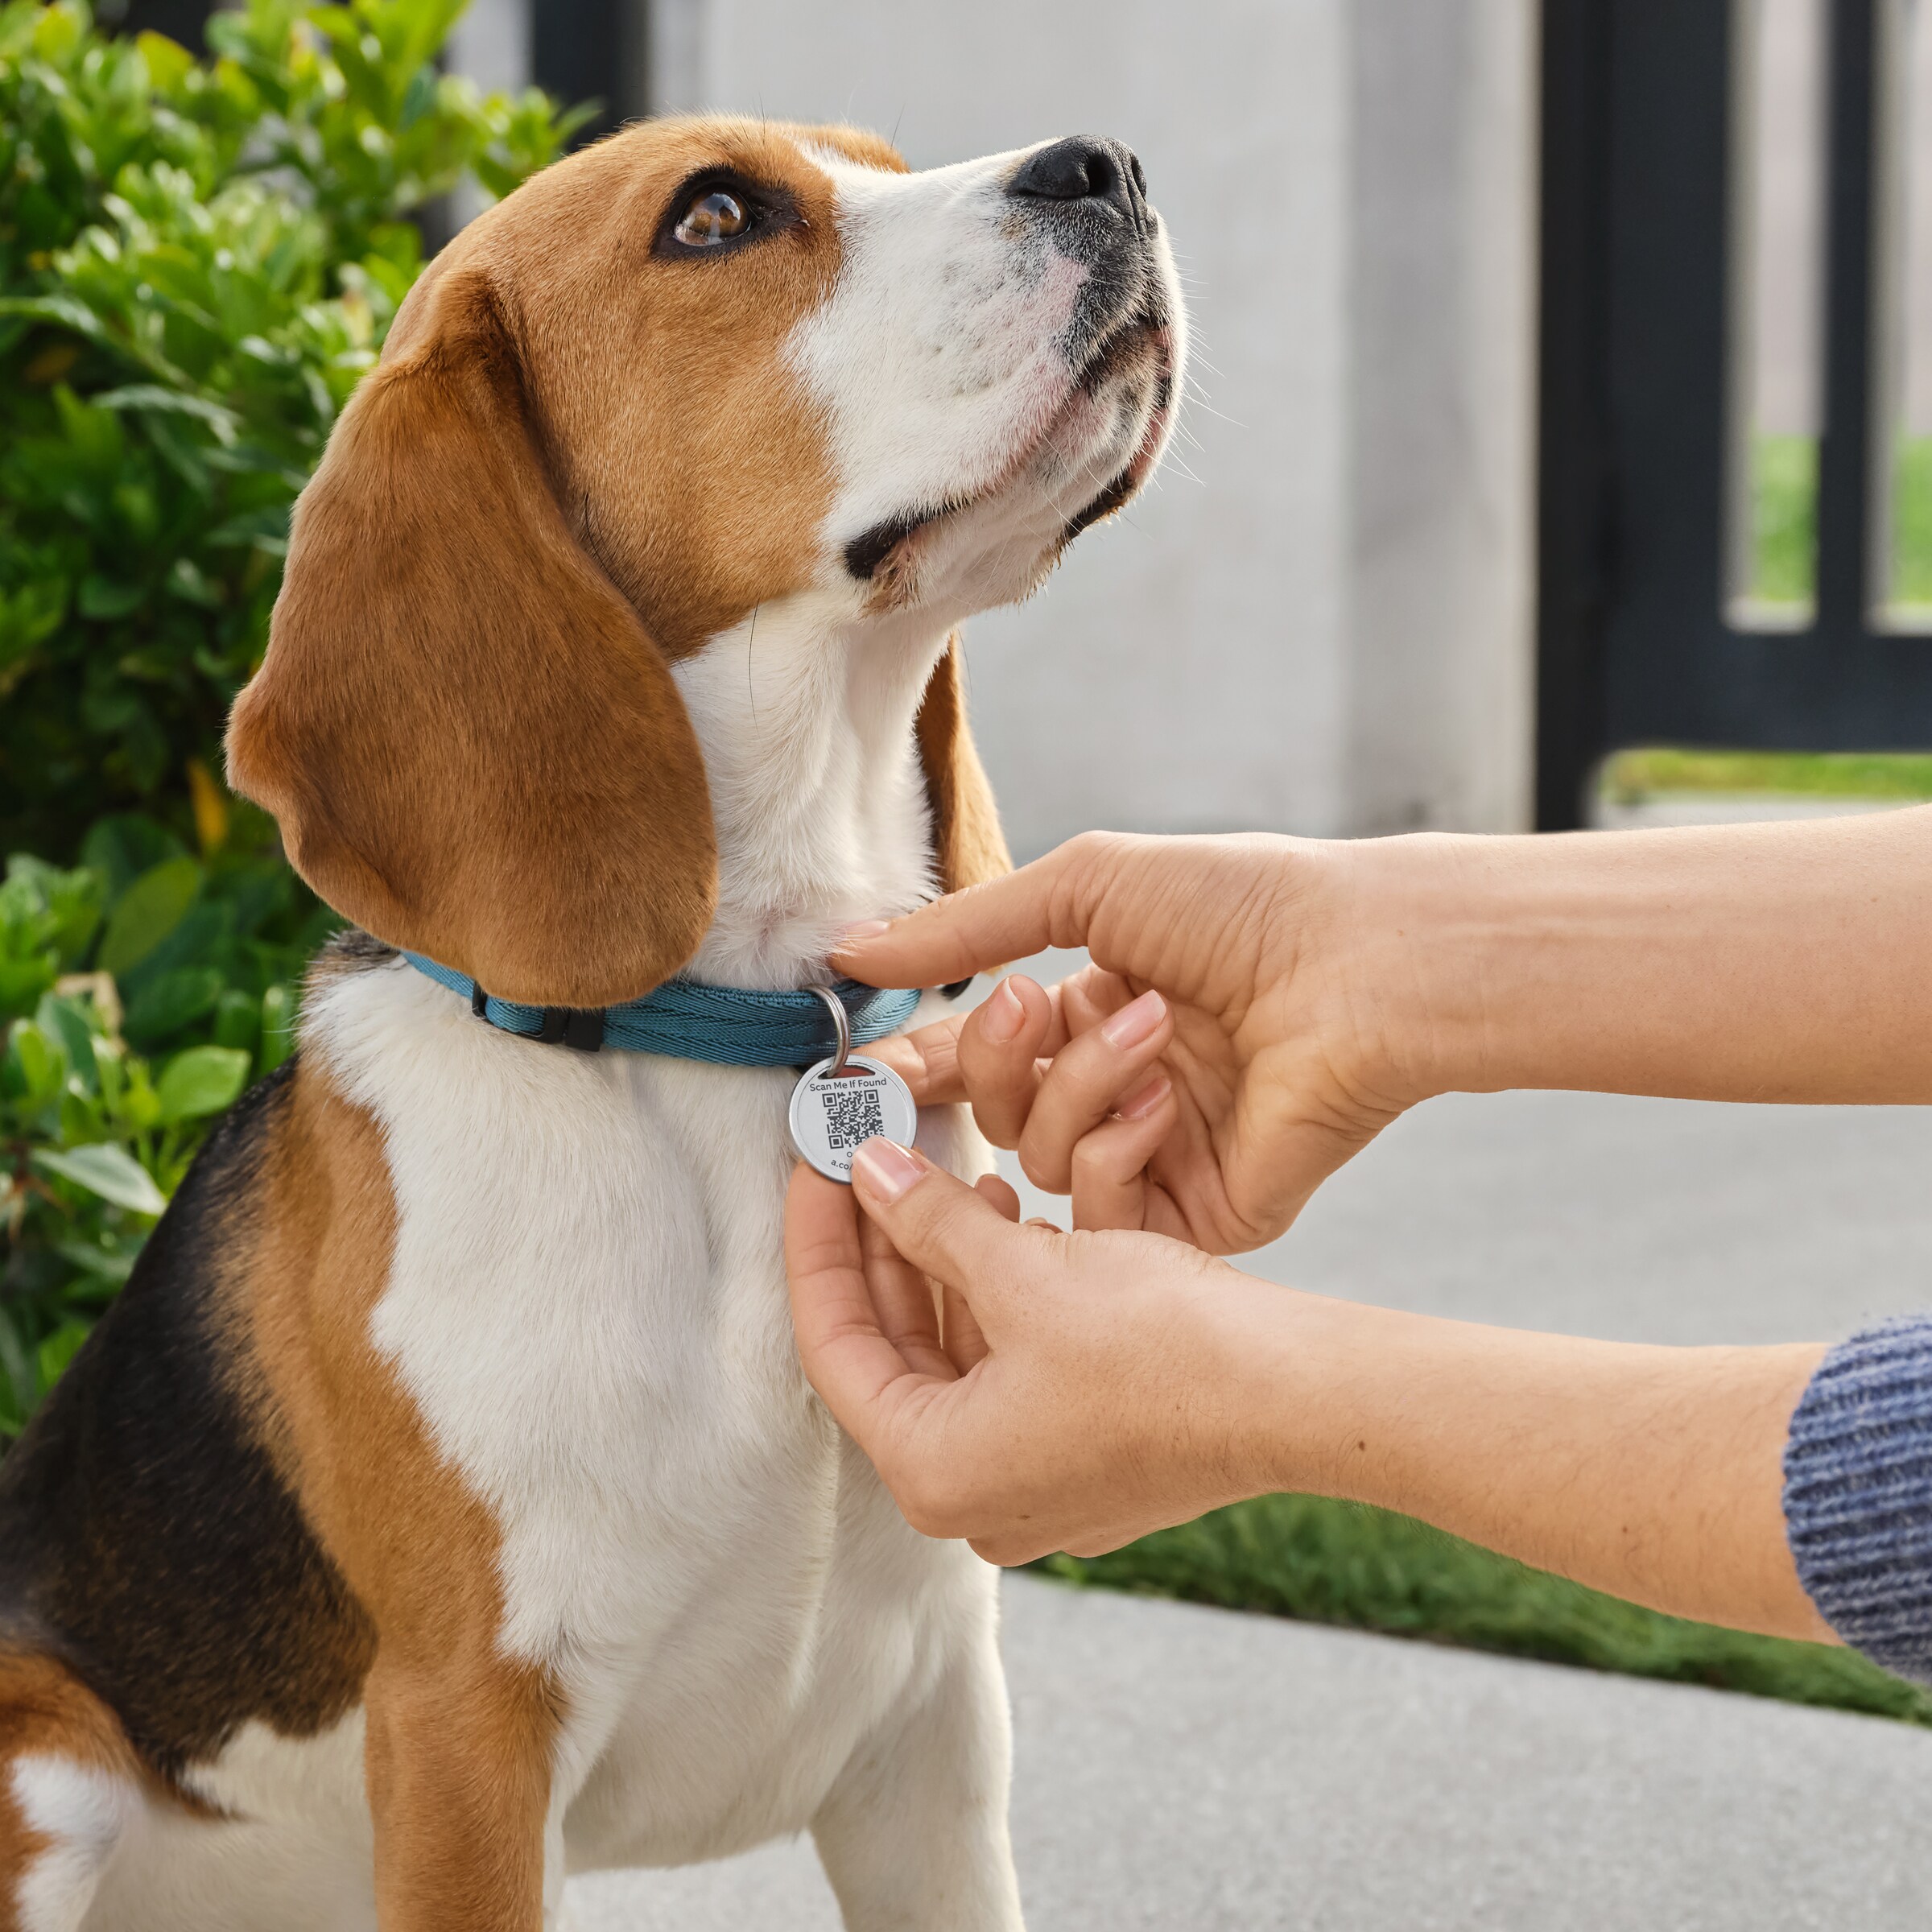  Introducing Ring Pet Tag, Easy-to-use tag with QR code, Real-time scan alerts, Shareable Pet Profile